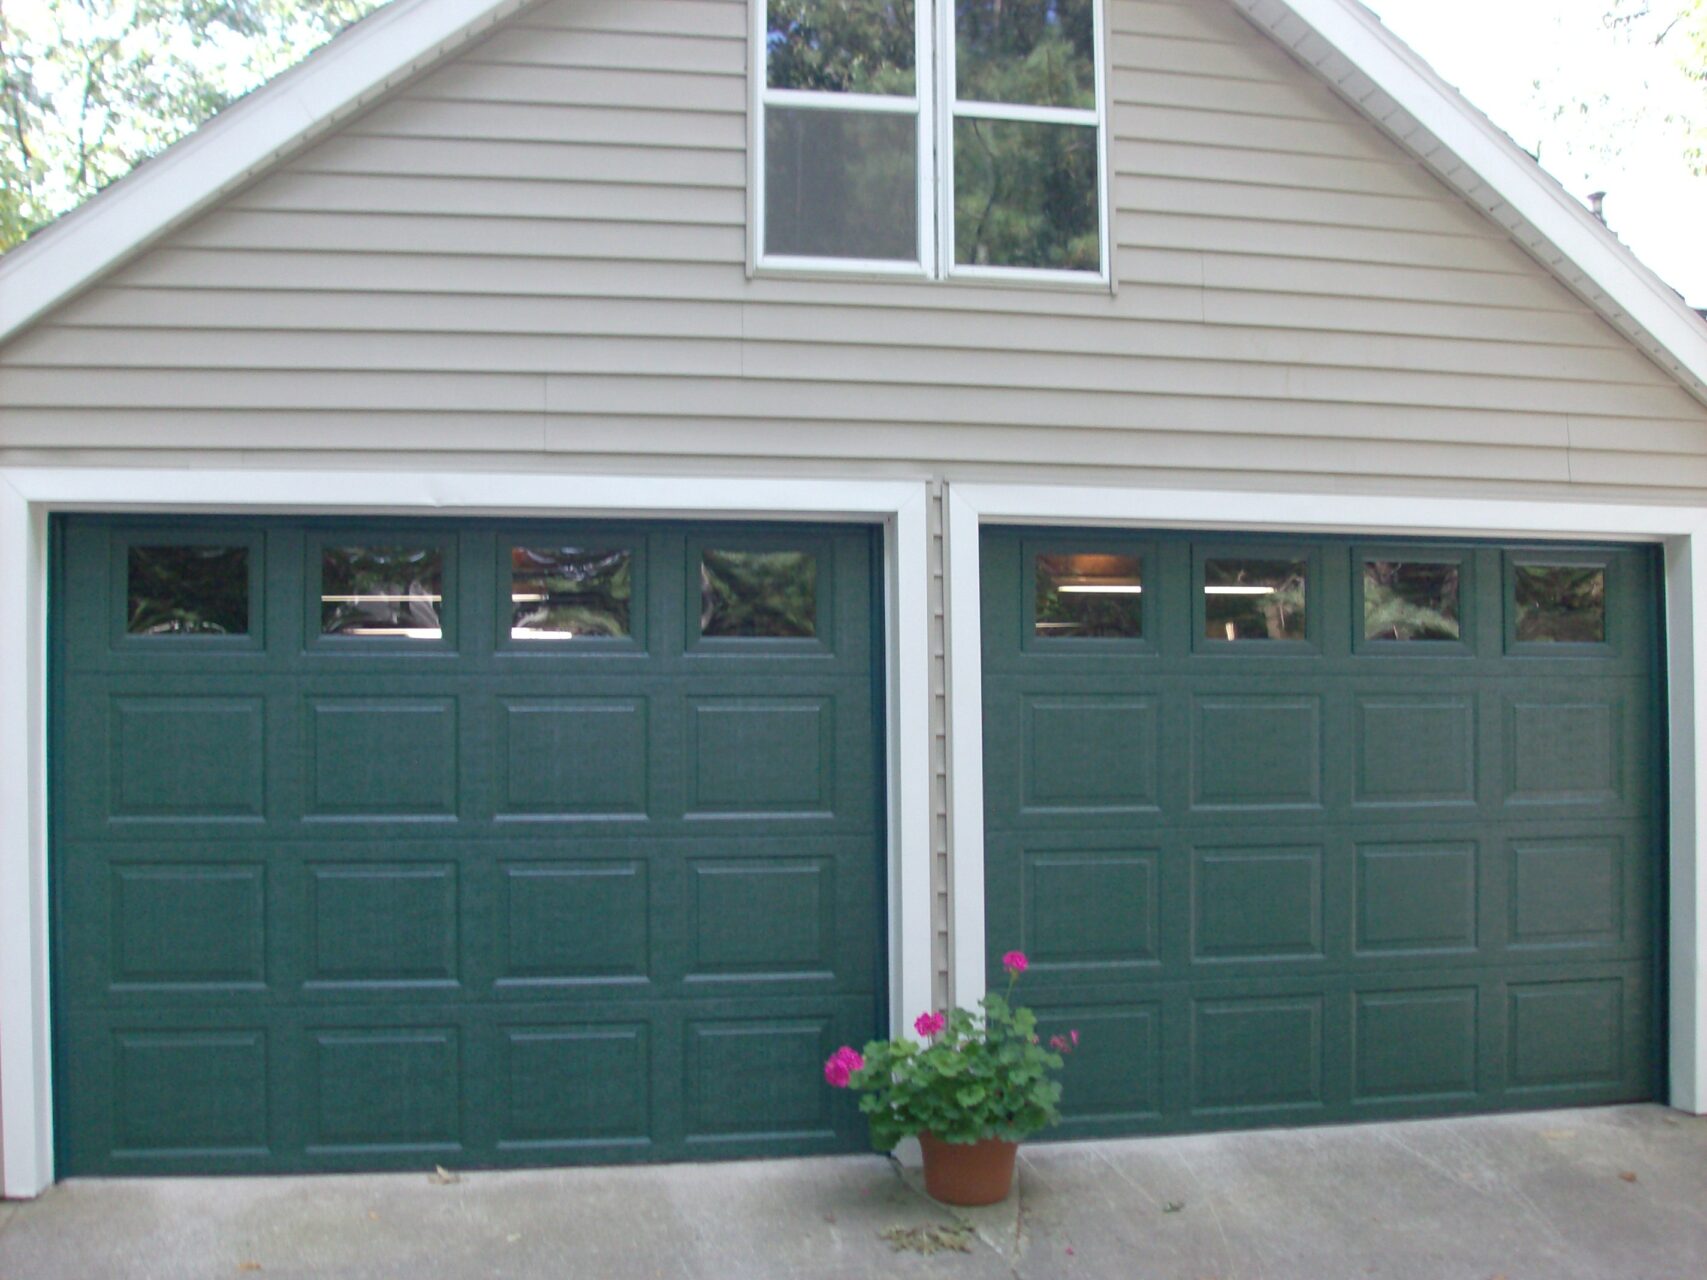 The raised panel is still the Most popular garage door style. But even it has its customizations.